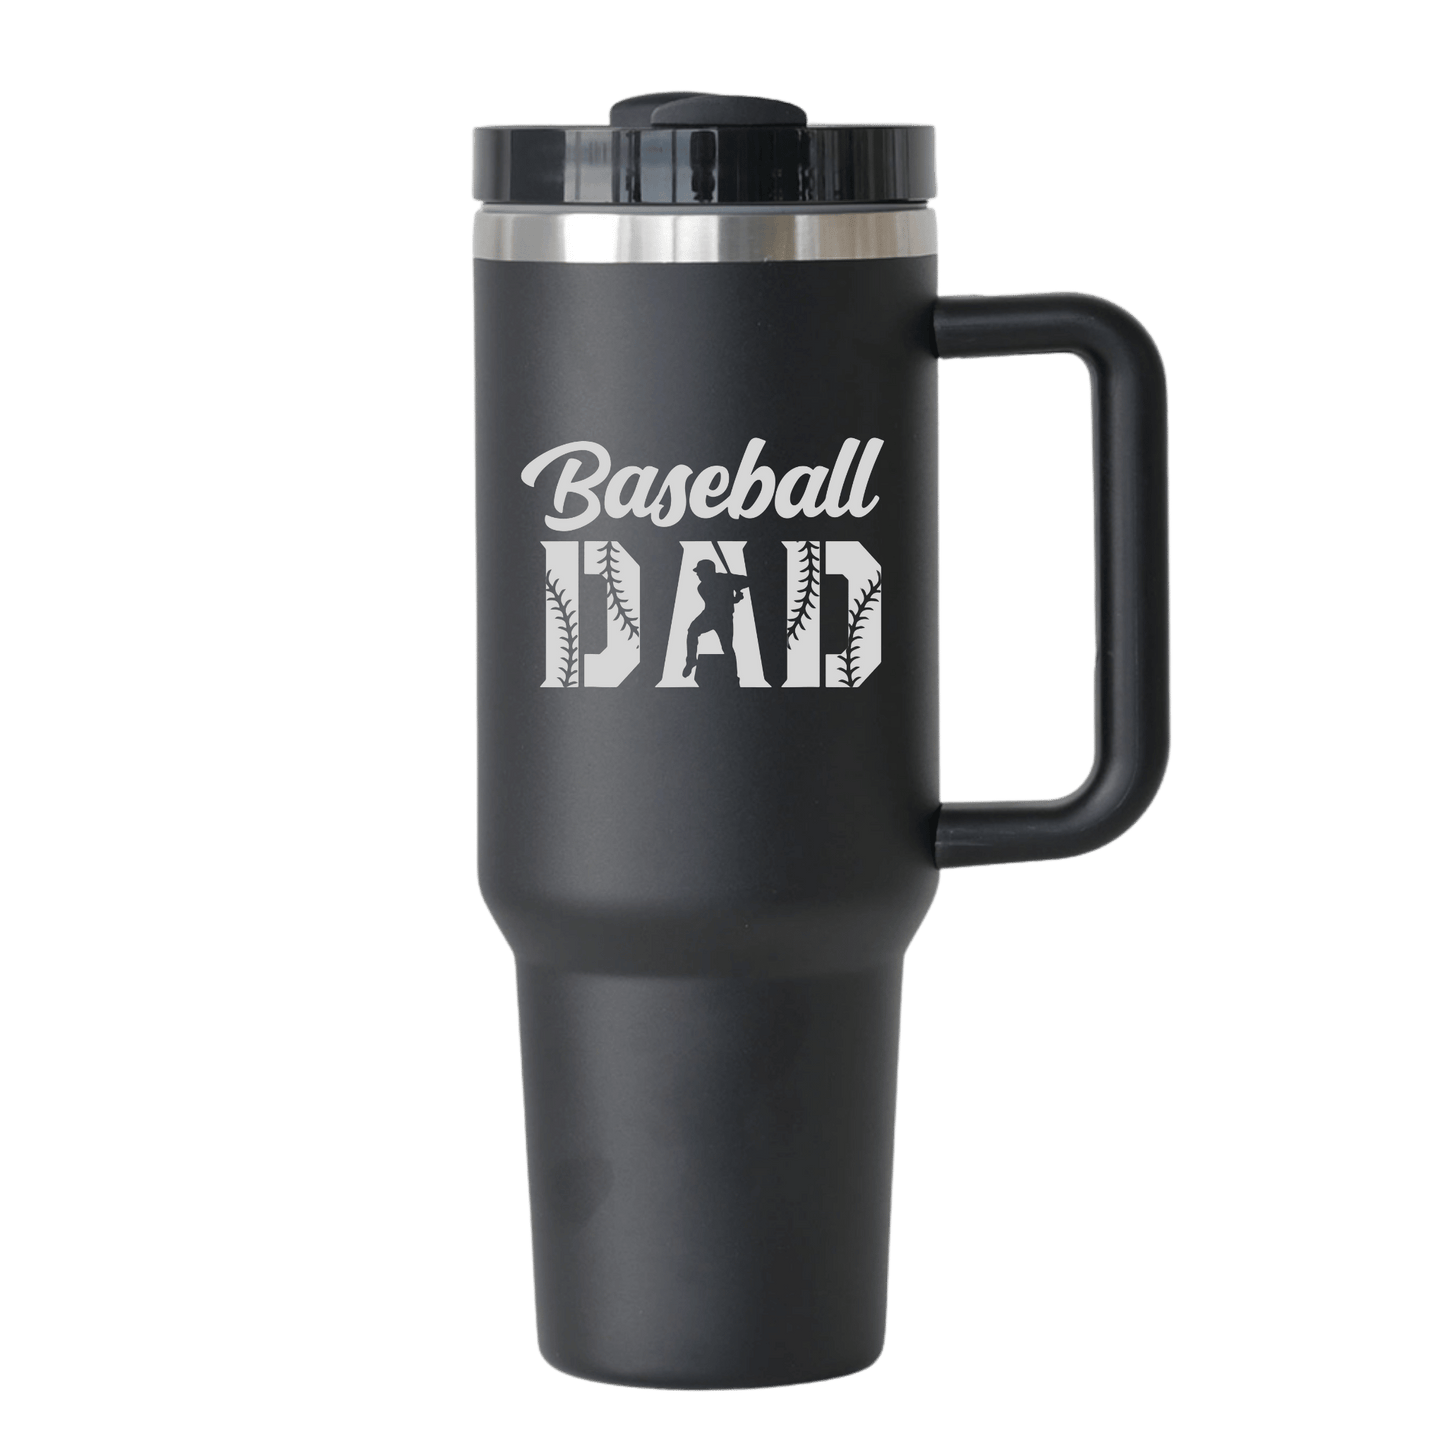 Baseball Dad Tumbler - with or without the number